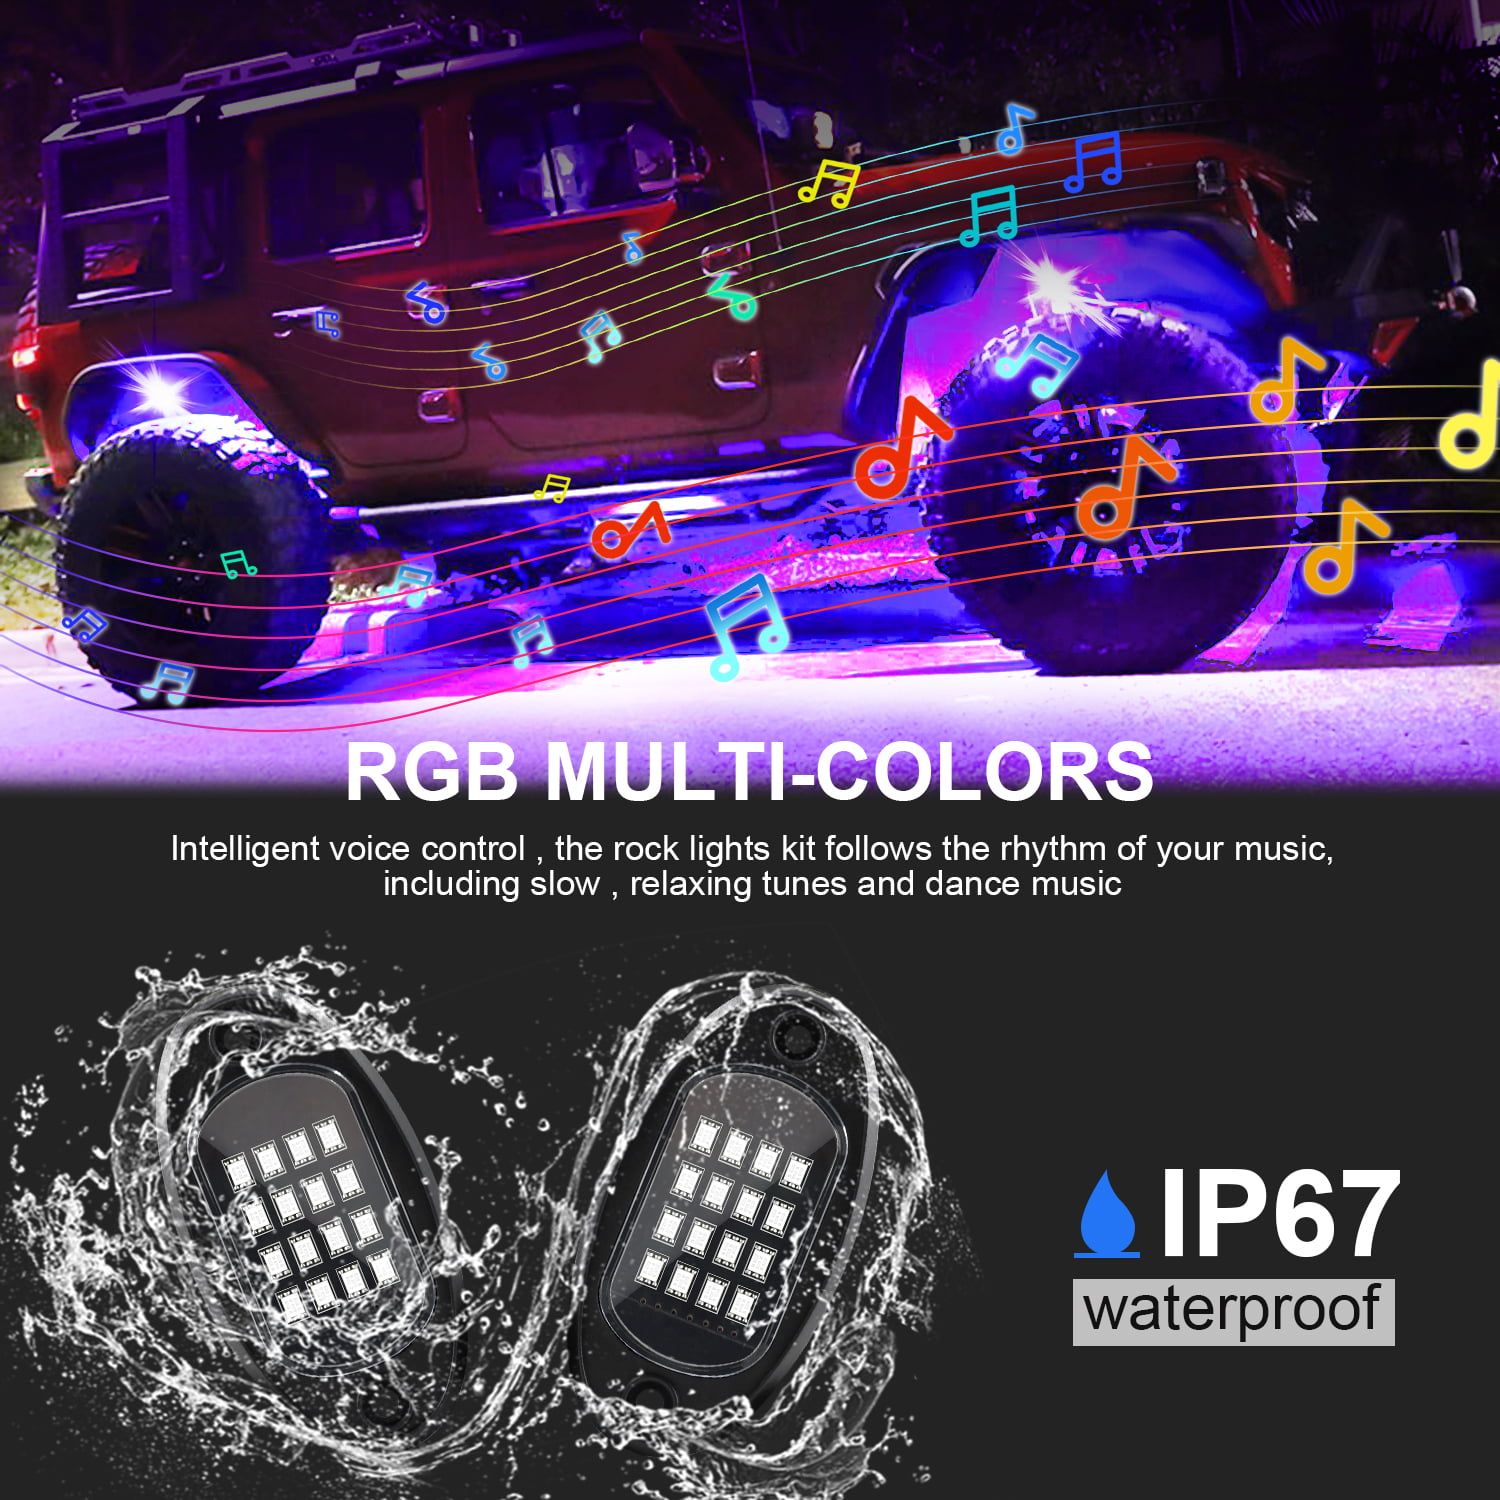 YCHOW-TECH RGB LED Rock Lights Kit, 8 Pods Multicolor Neon LED Light Kit  with Bluetooth Control Music Mode, High Bright Multilcolor Waterproof IP68